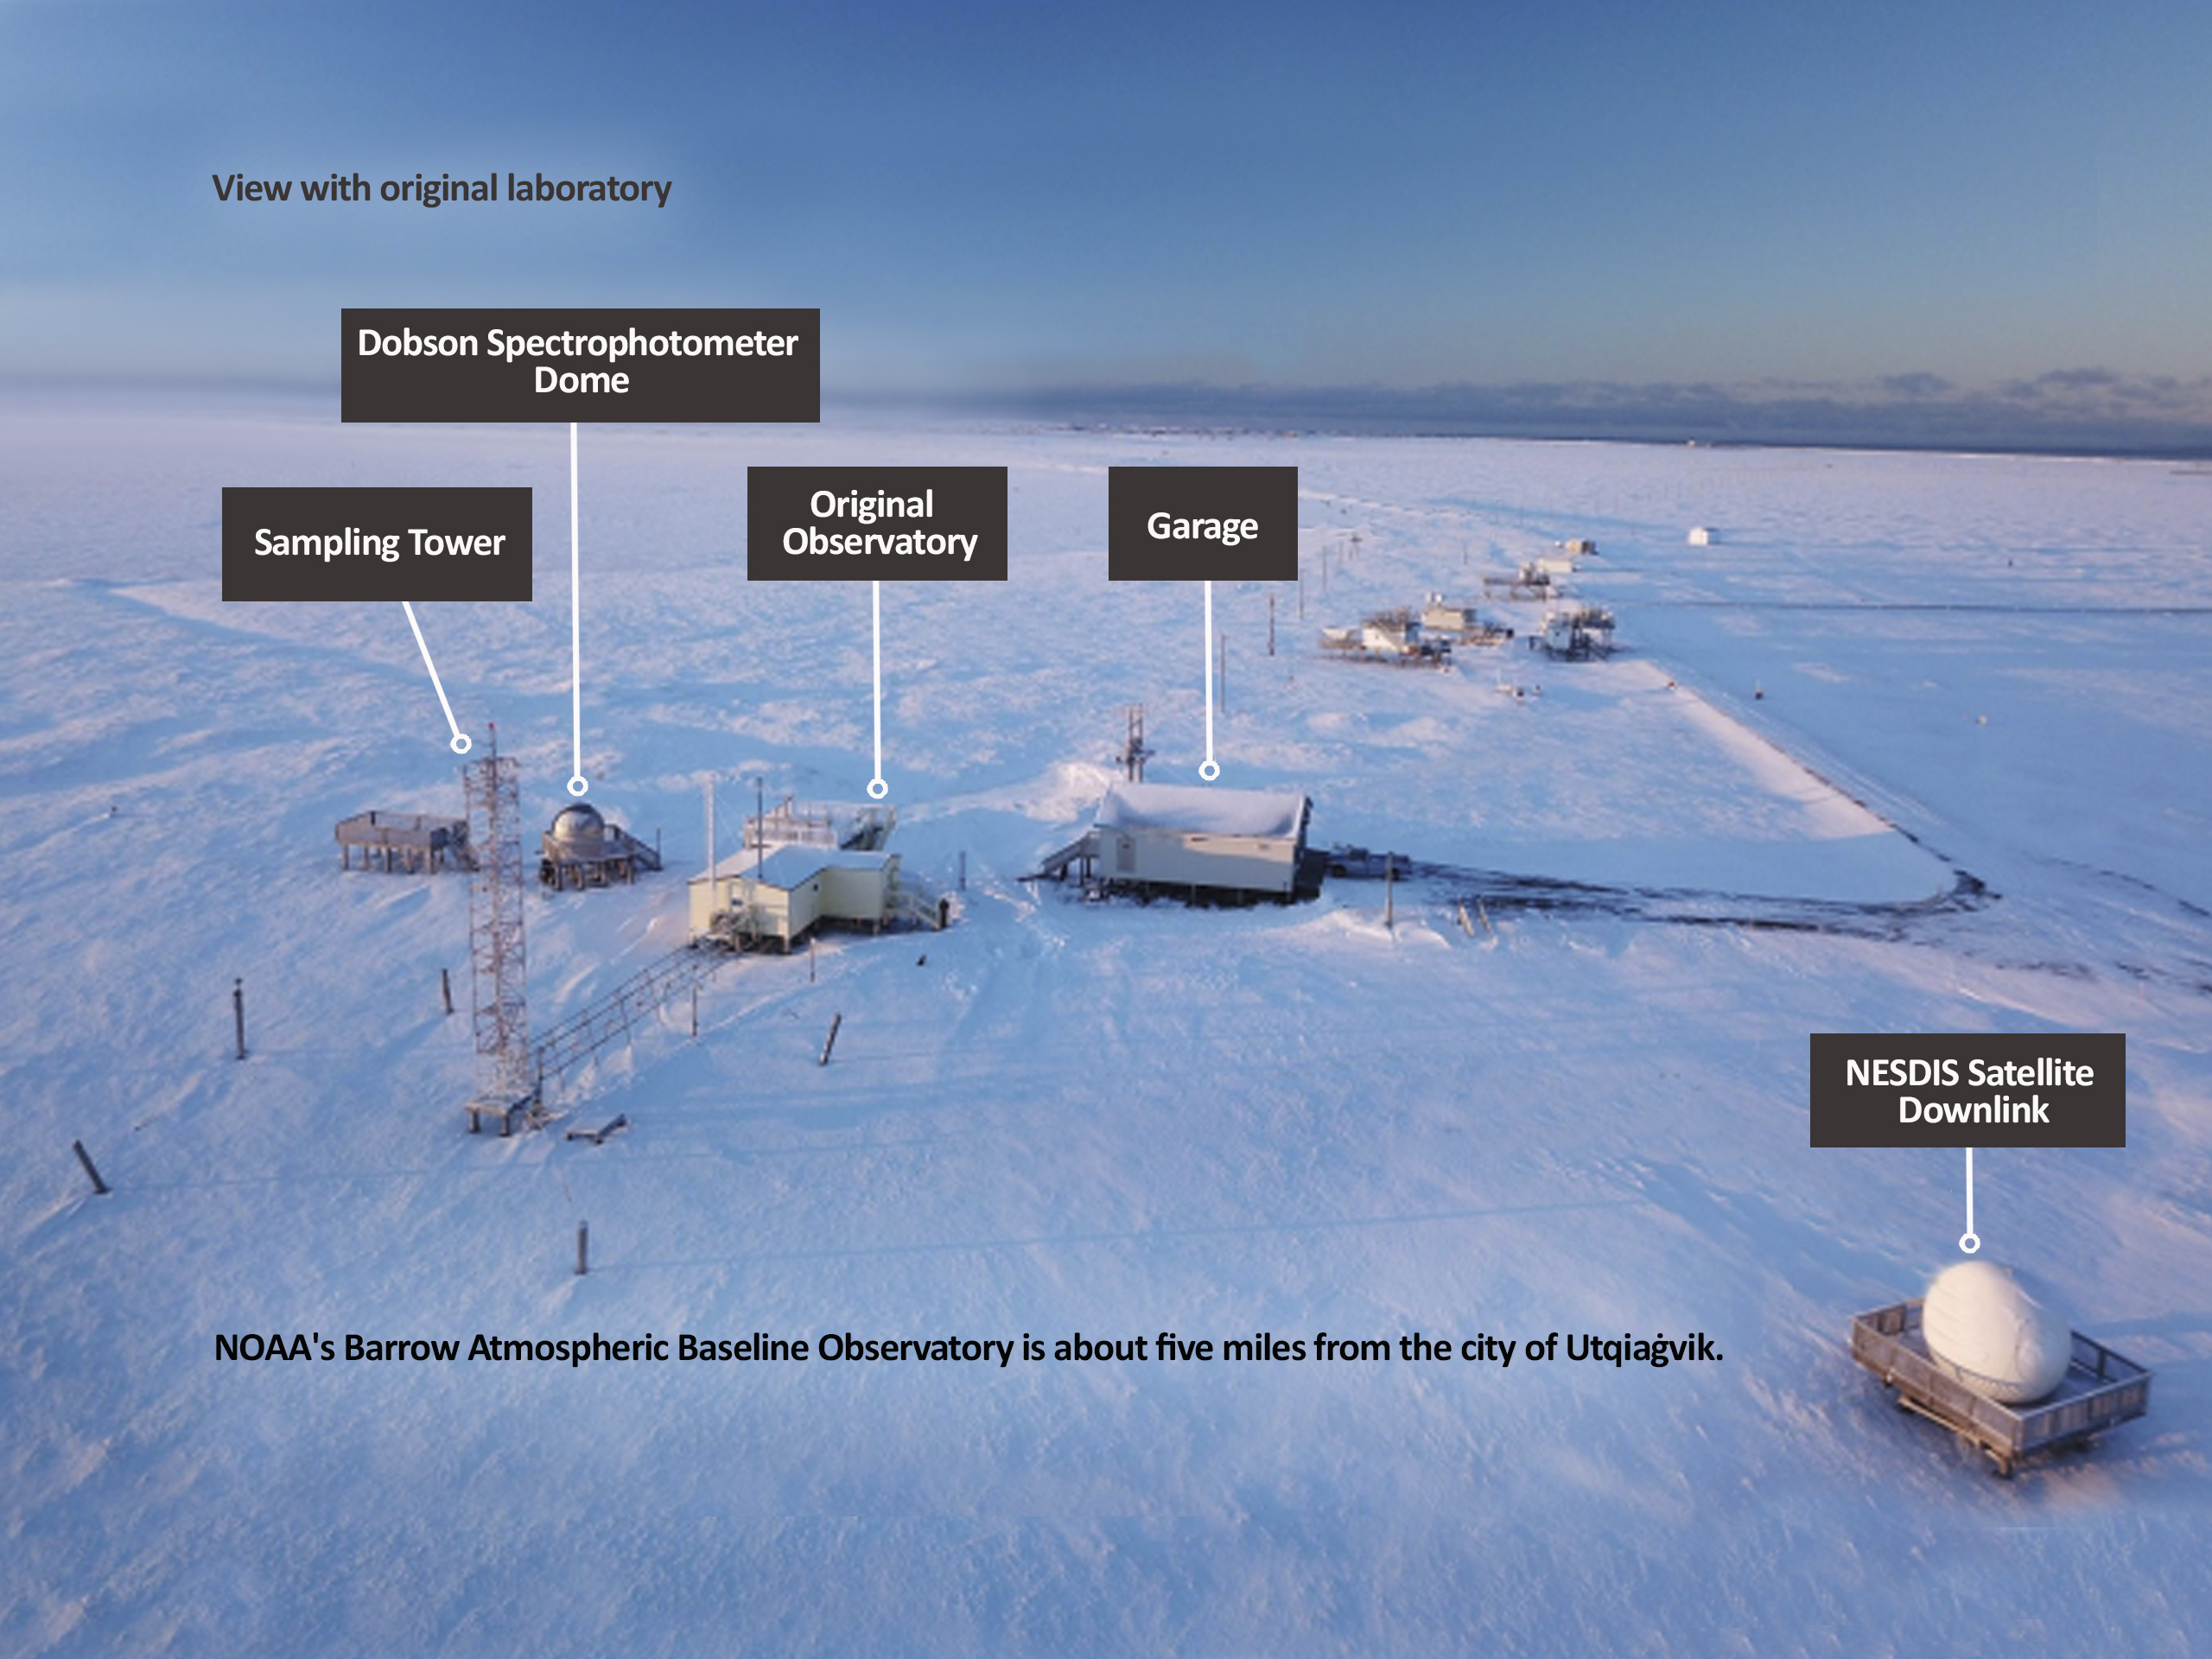 NOAA's Barrow Atmospheric Baseline Observatory is about five miles from the city of Utqiaġvik.